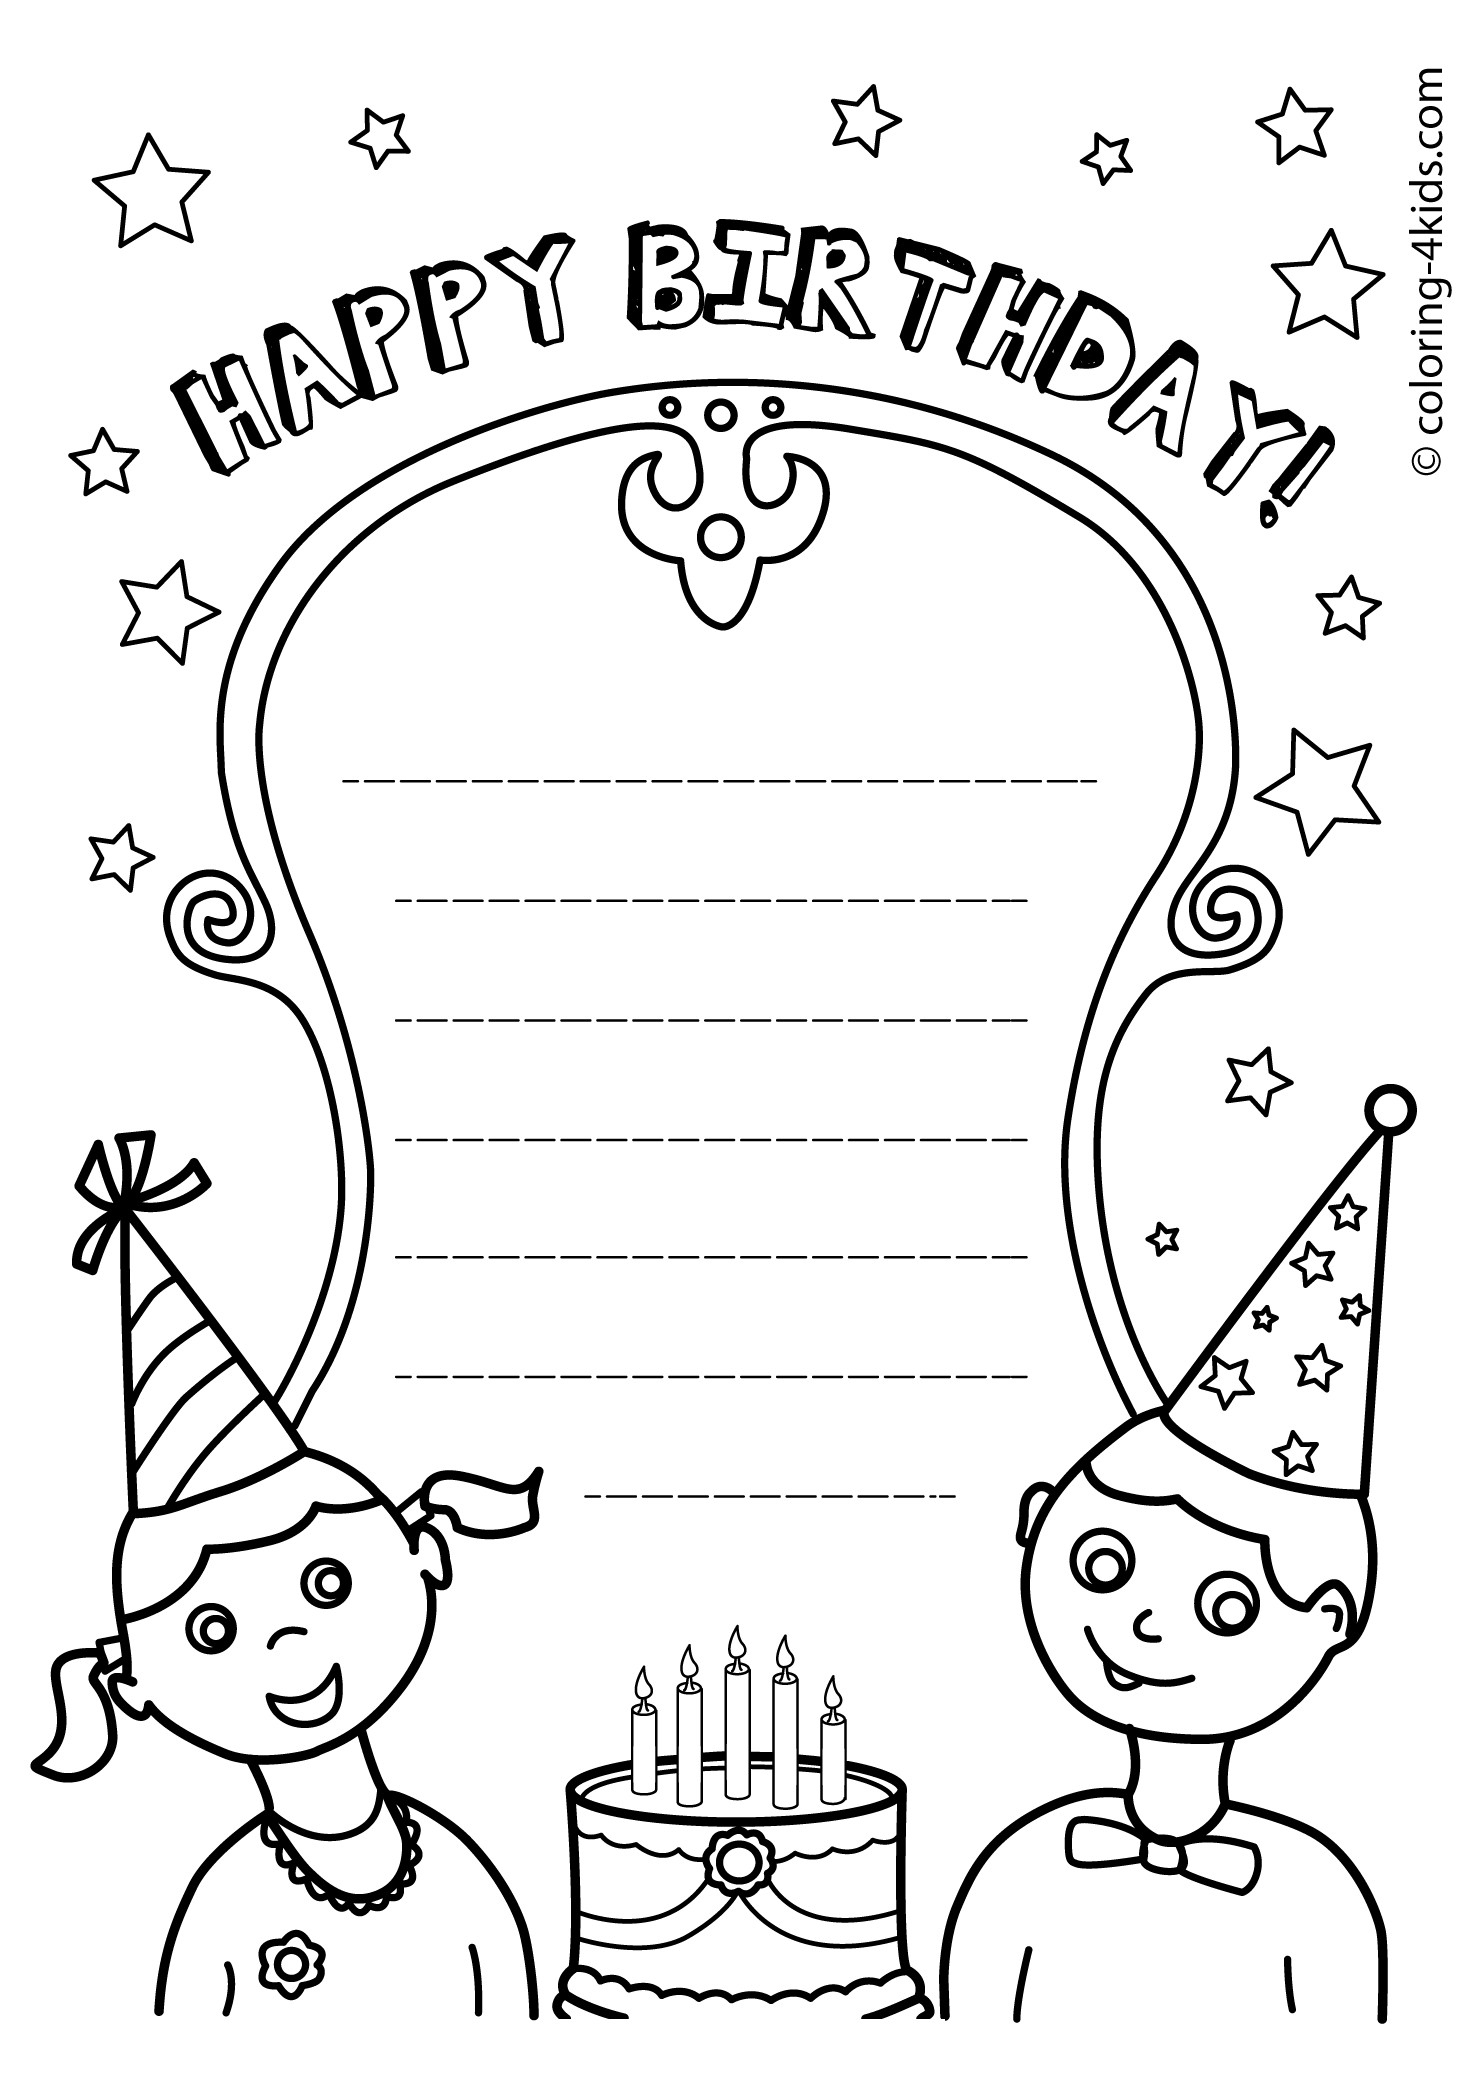 happy birthday coloring card new collection 2020 free printable - birthday card coloring page at getcoloringscom free printable | printable coloring birthday cards free